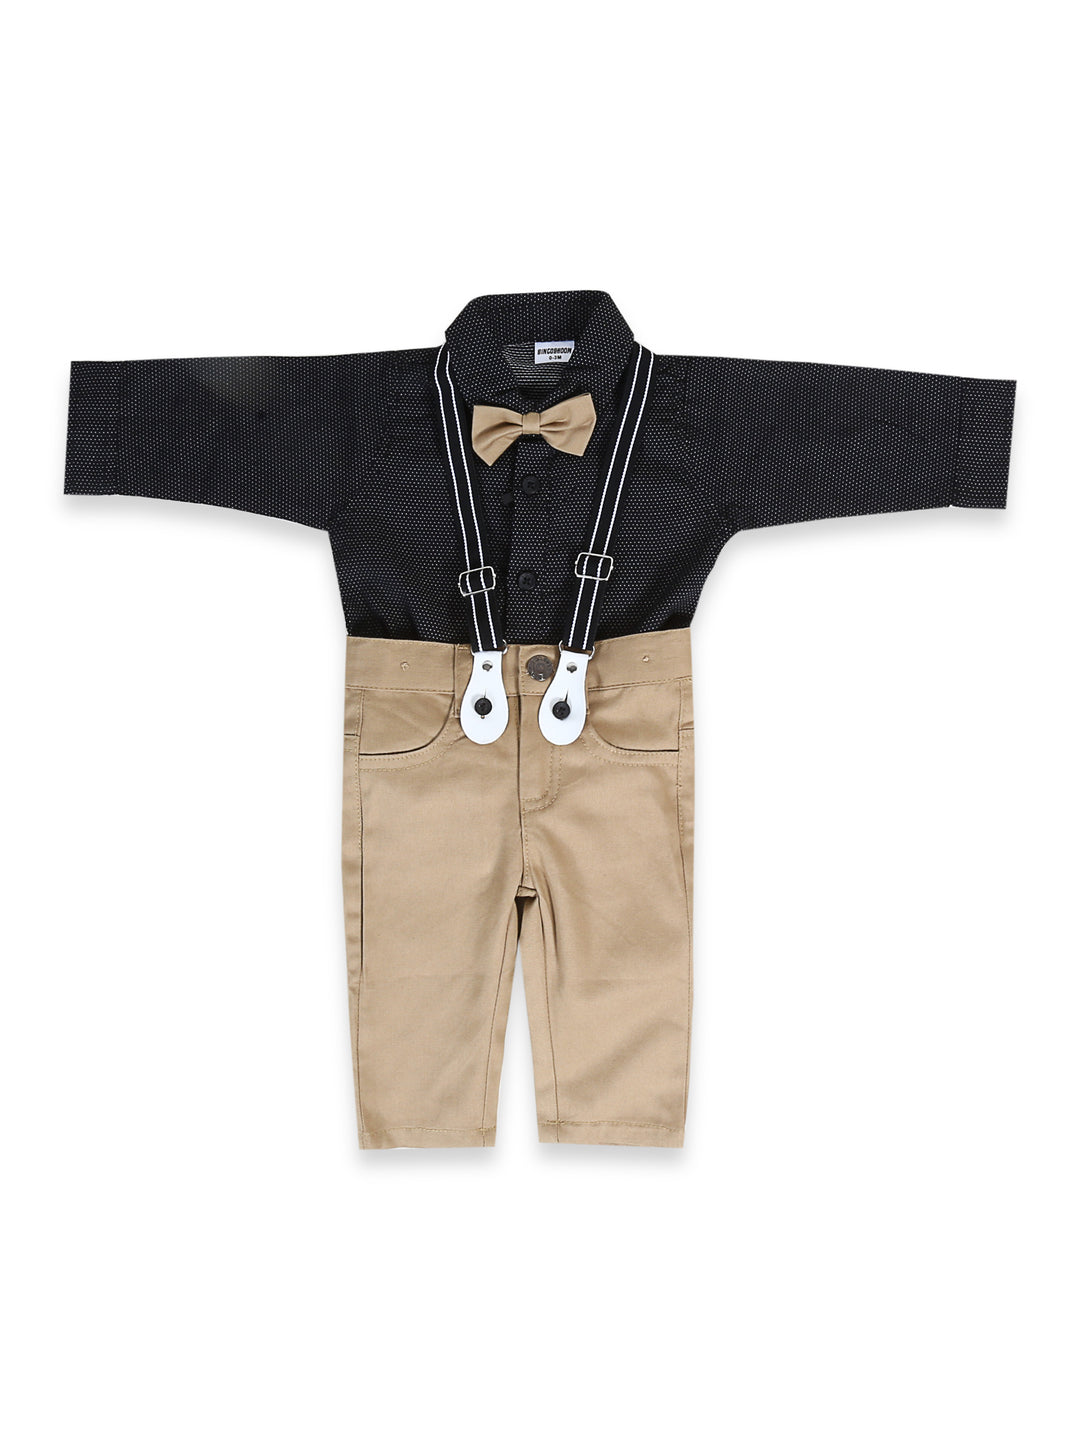 Bingobhoom Boys H/S Romper With Gallace #012 (S-24)